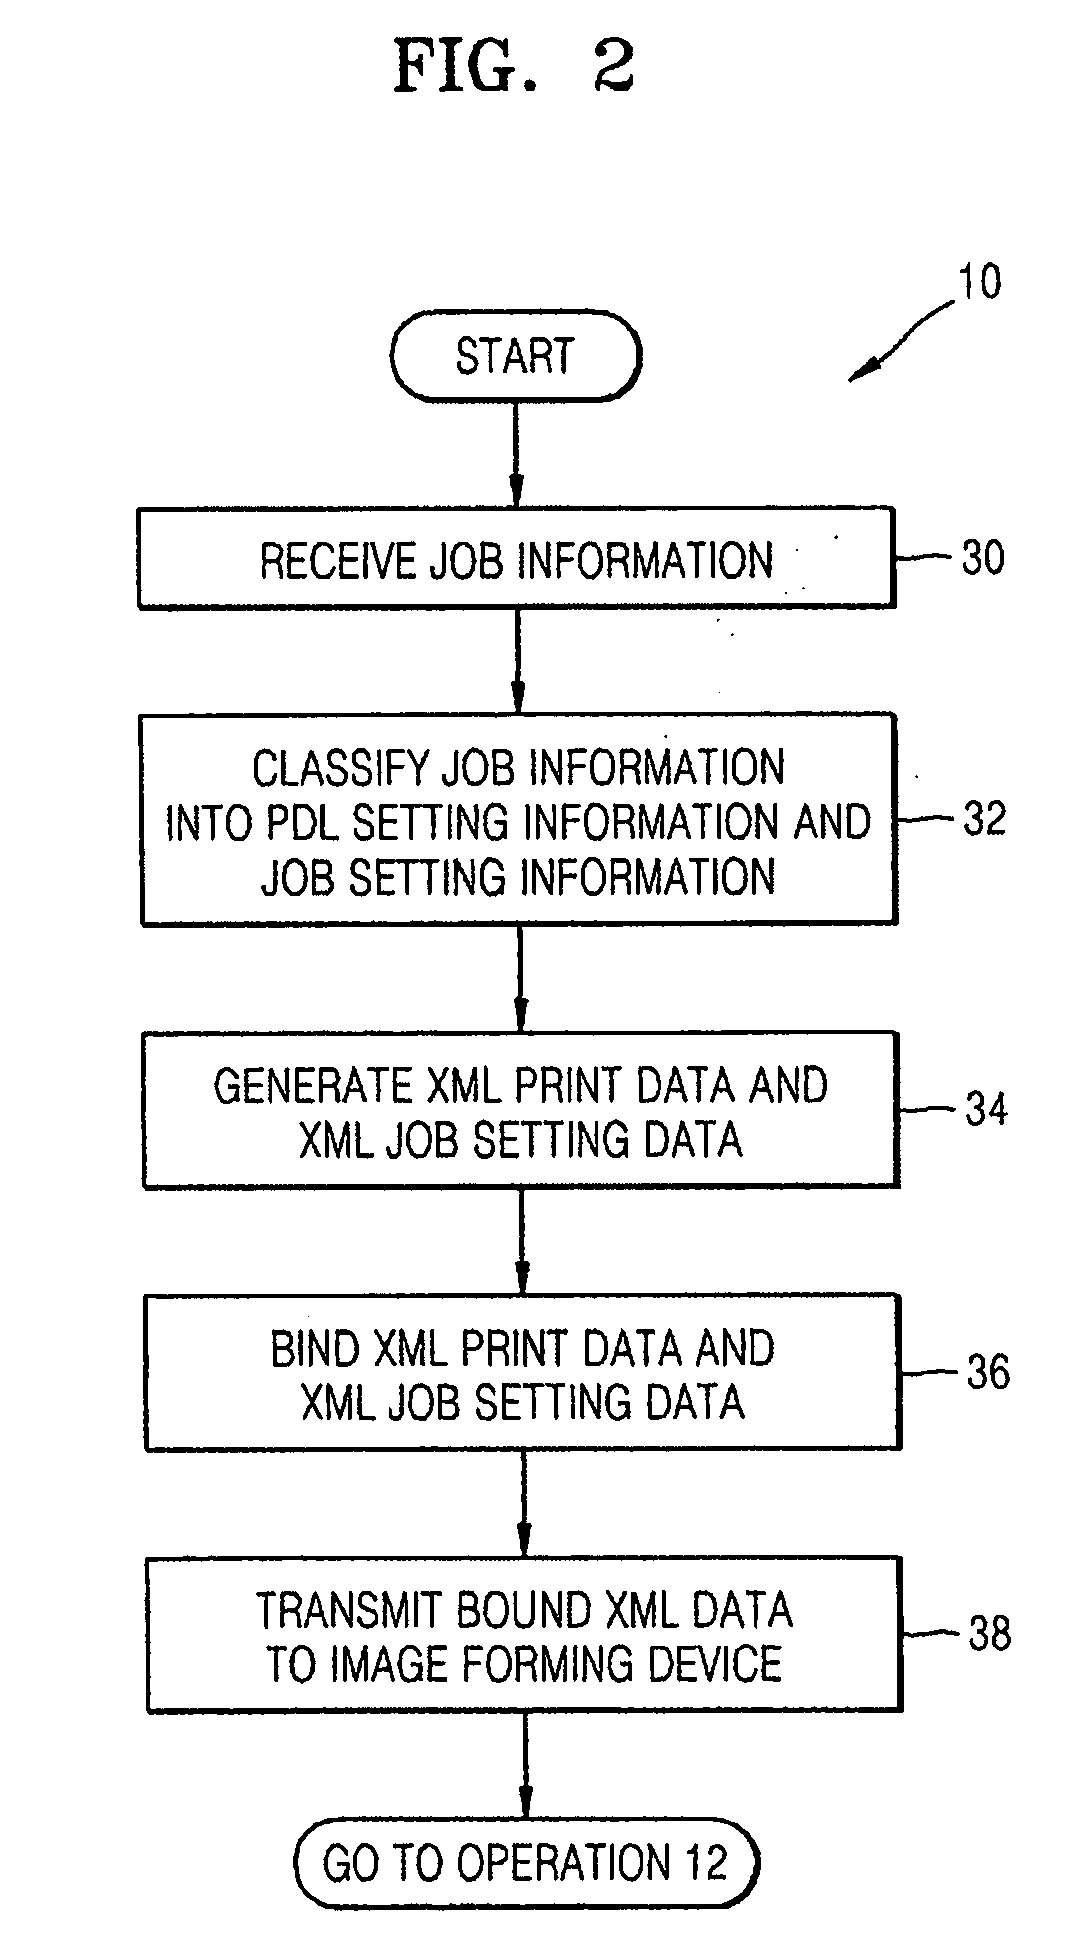 Method and system to form image using XML data